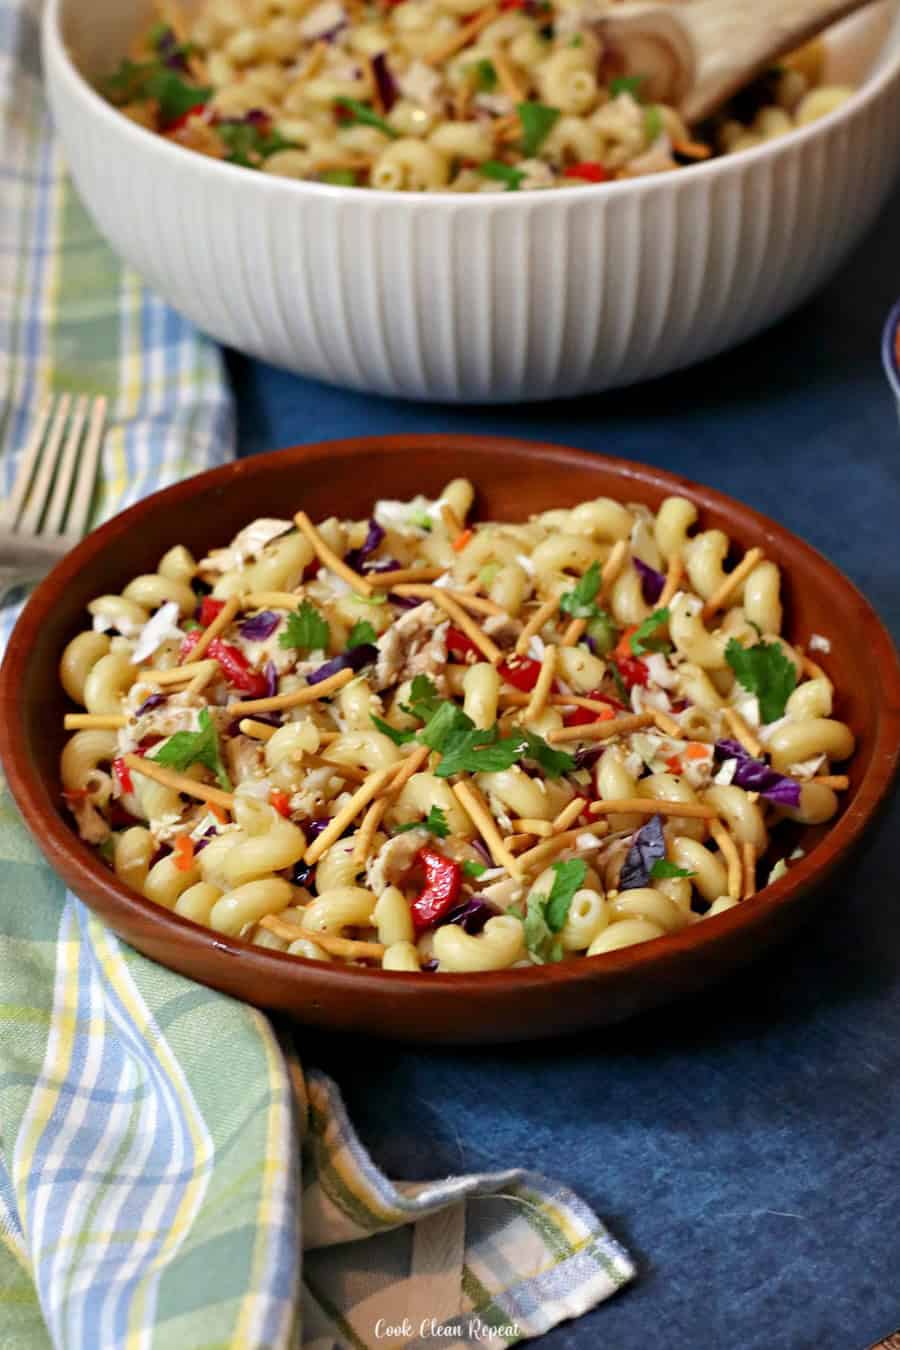 Pasta Salad With Chicken - Cook Clean Repeat